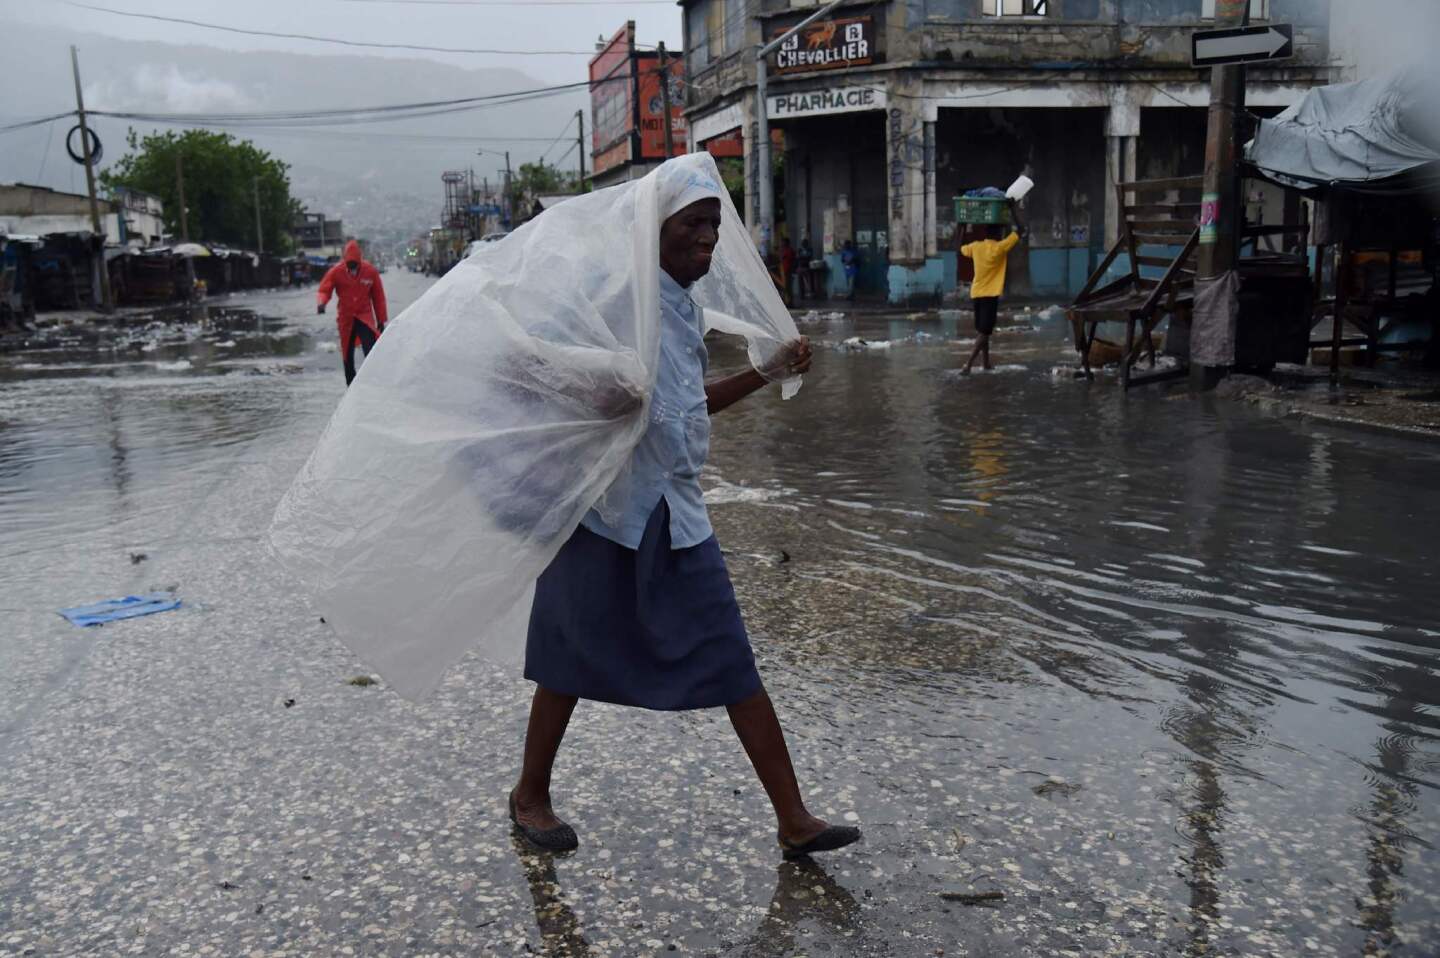 A woman protects herself from the rain with plastic during hurricane Matthew in Port-au-Prince, Haiti, on Oct. 4, 2016.